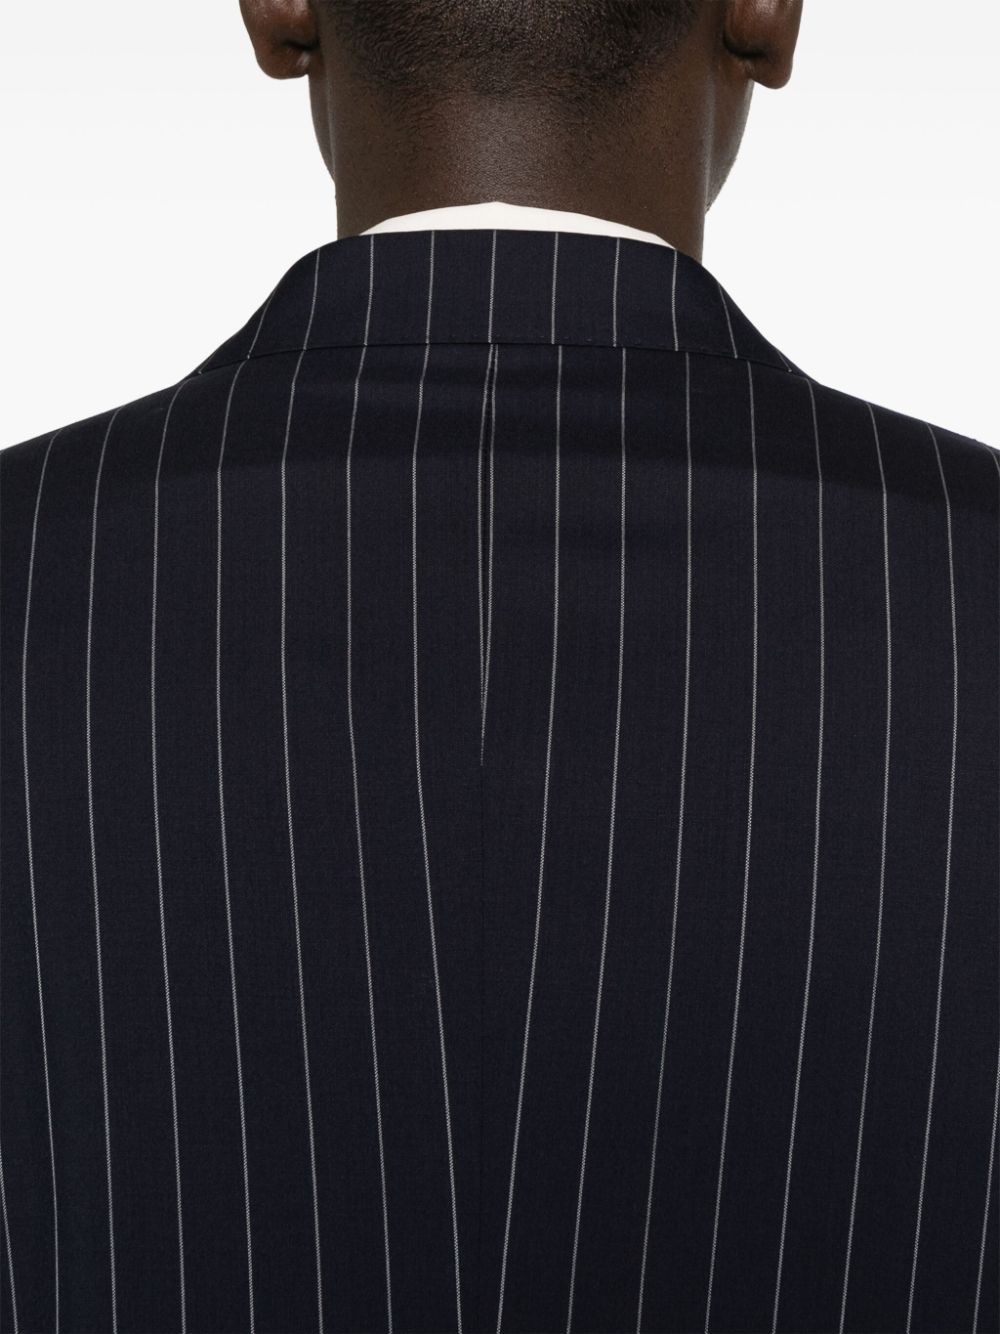 Blue double-breasted pinstripe suit